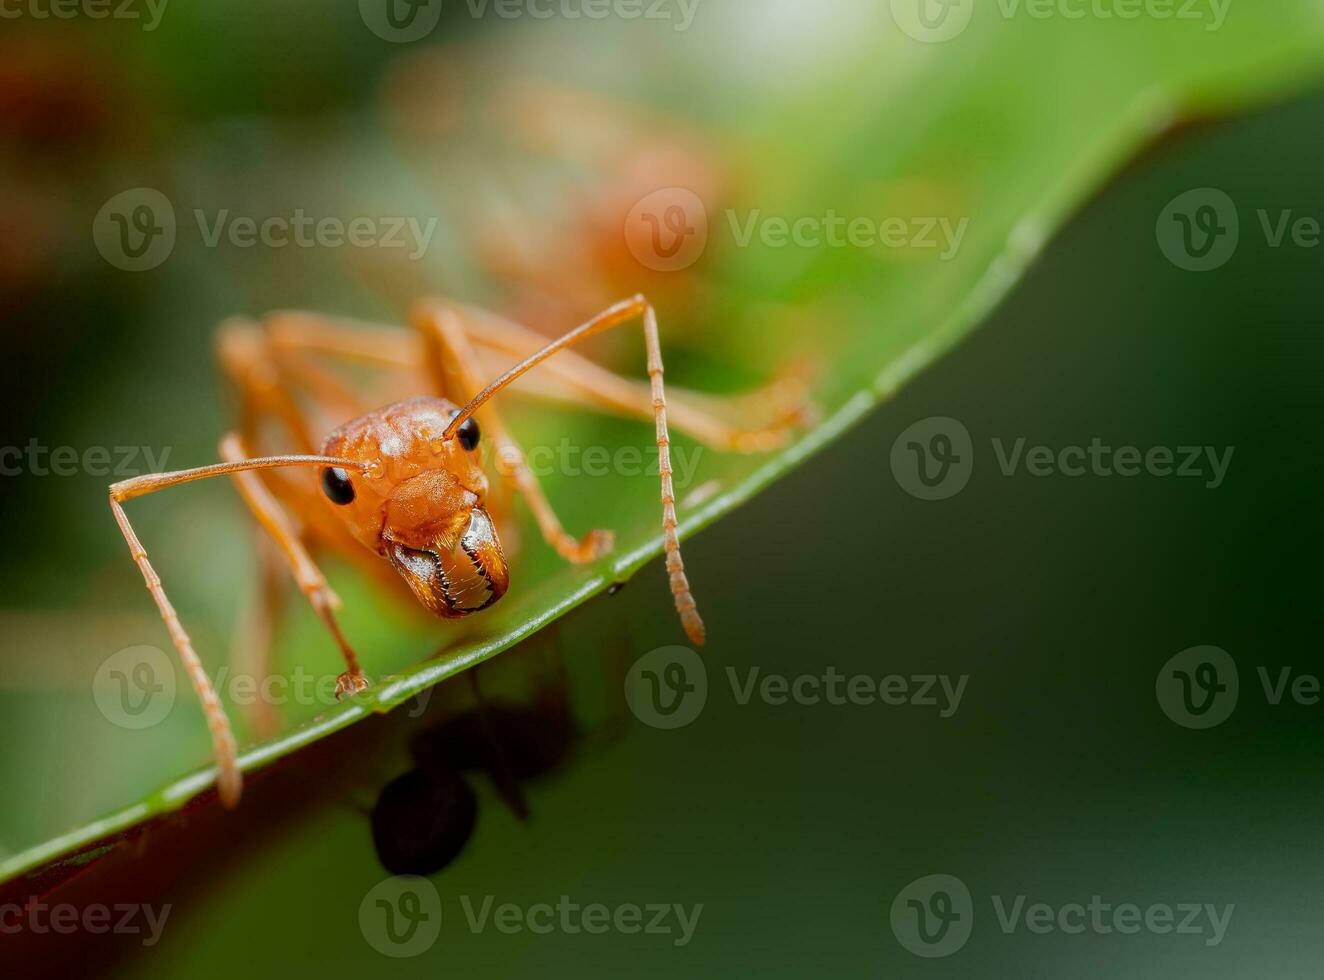 Red ants or Oecophylla smaragdina of the family Formicidae found their nests in nature by wrapping them in leaves. red ant face macro animal or insect life photo